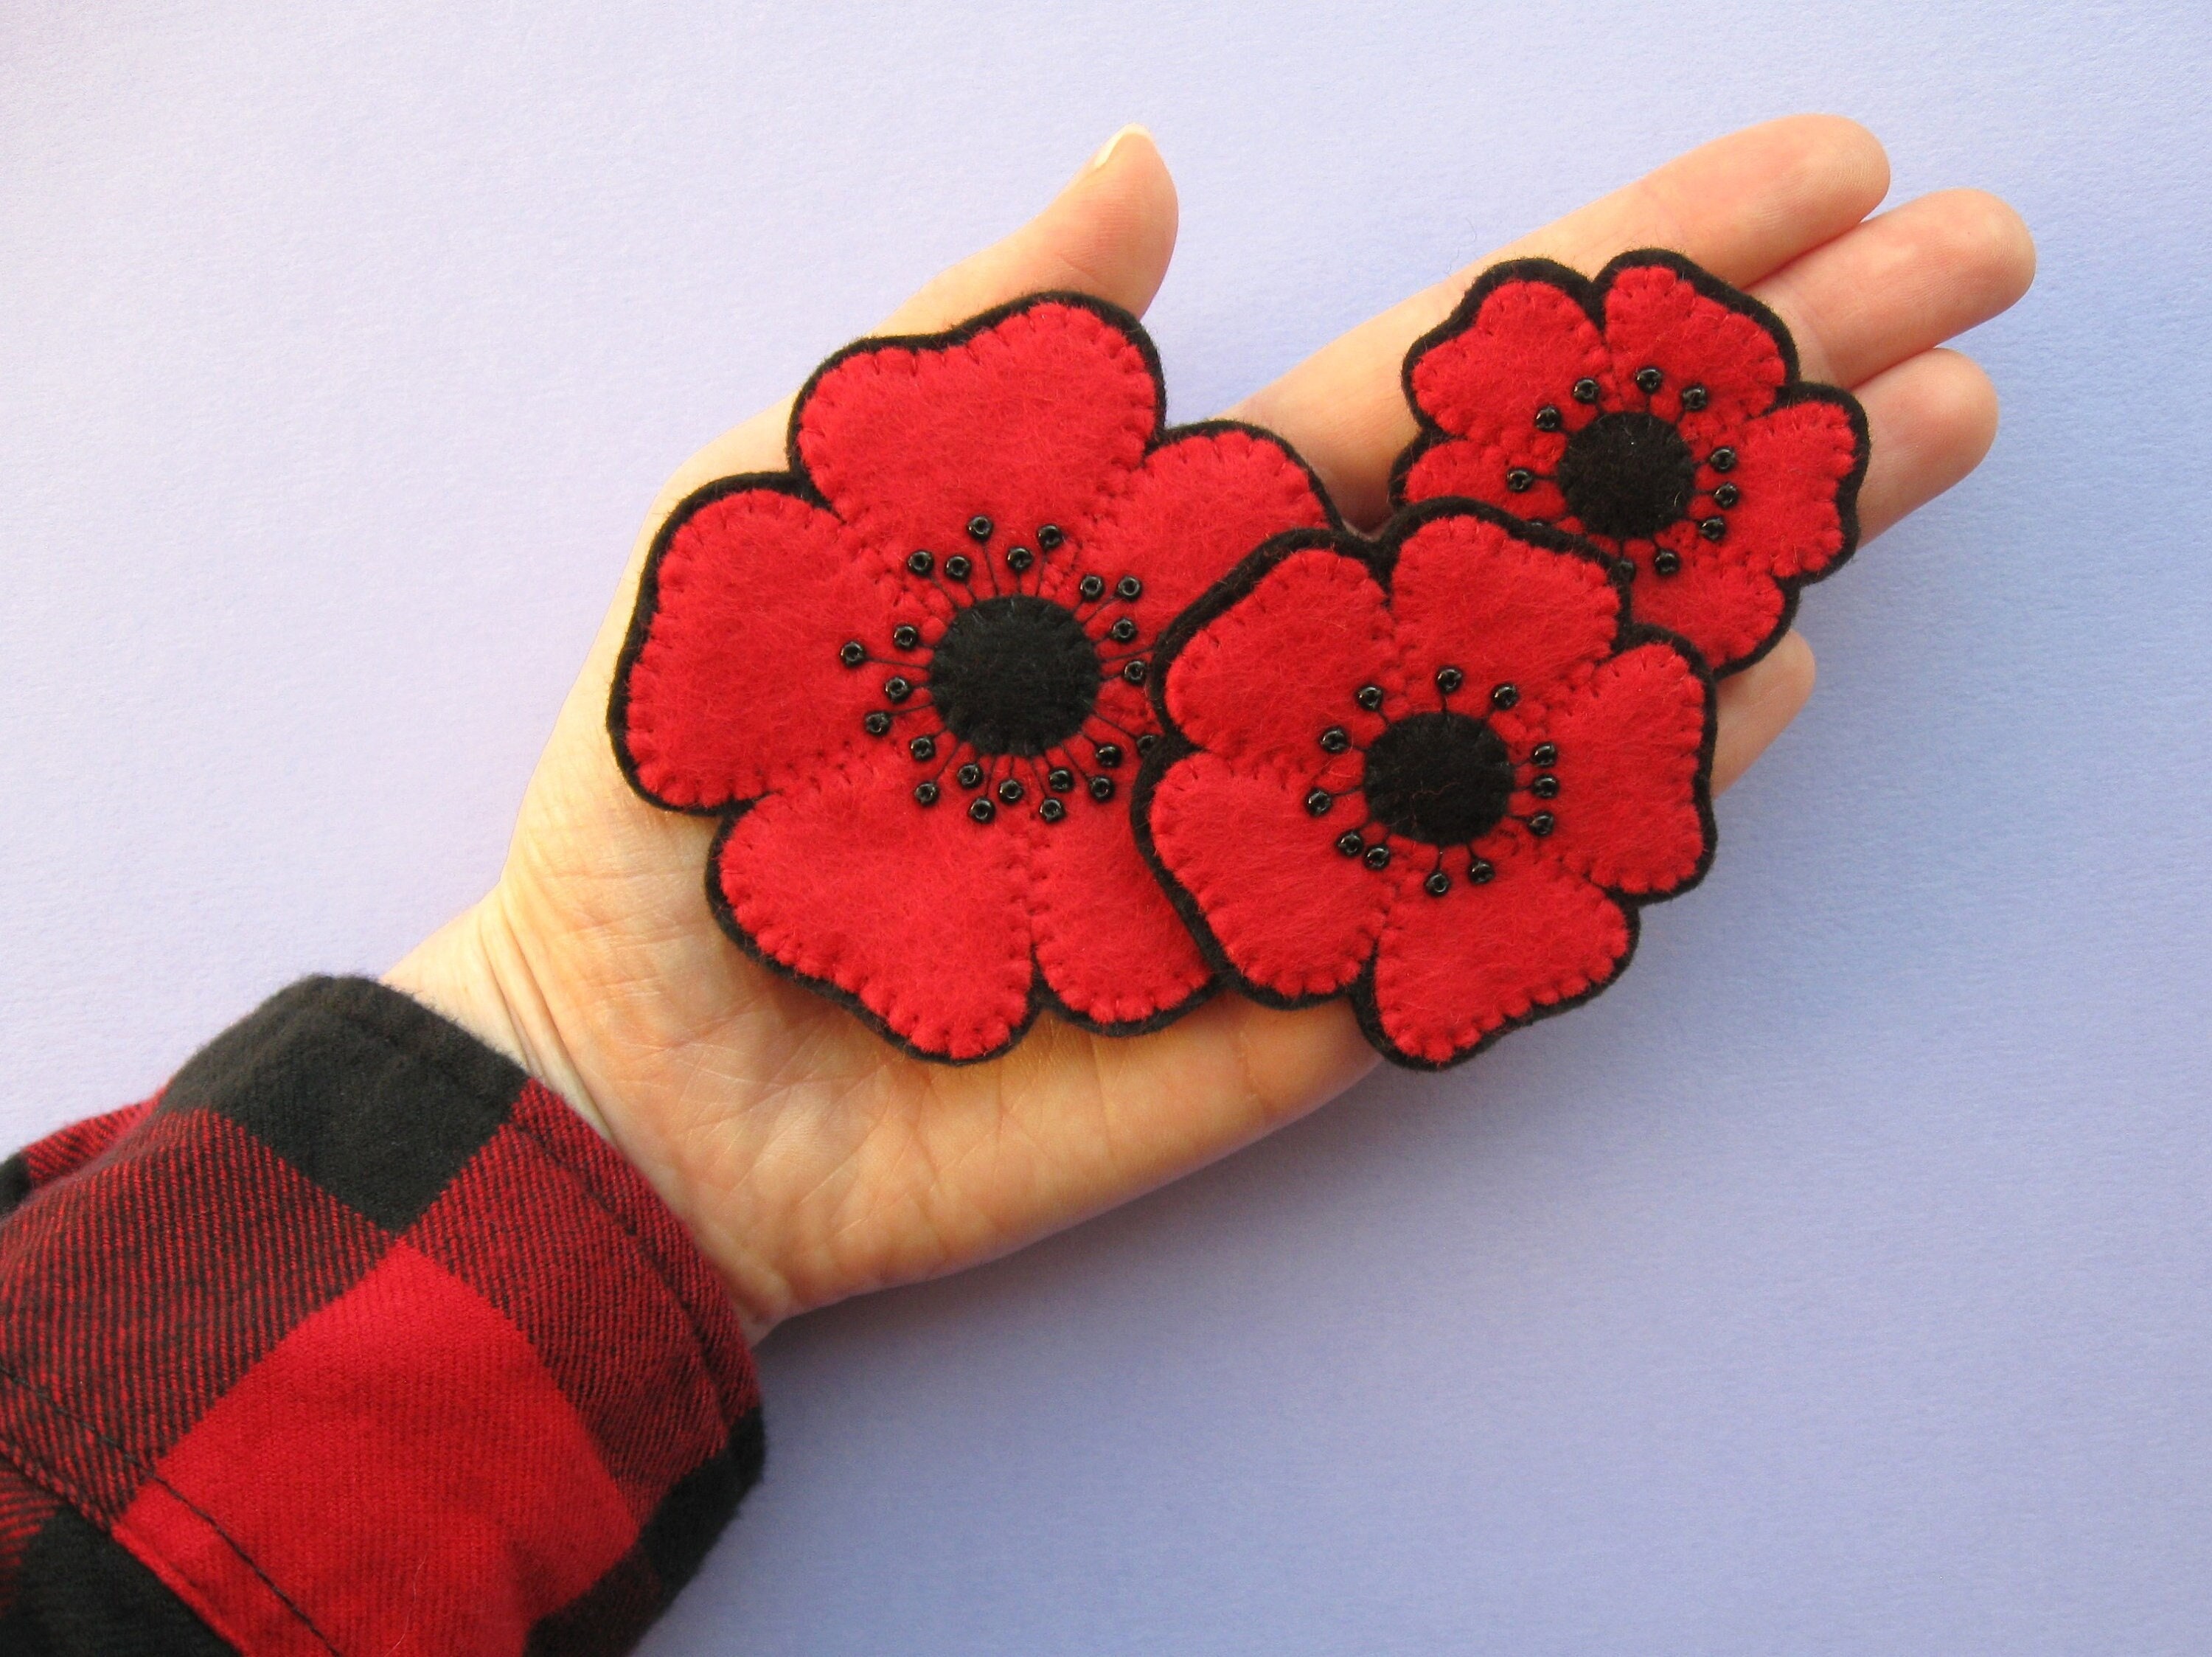 Must-Have Tools for Sewing - Red Poppy Creations